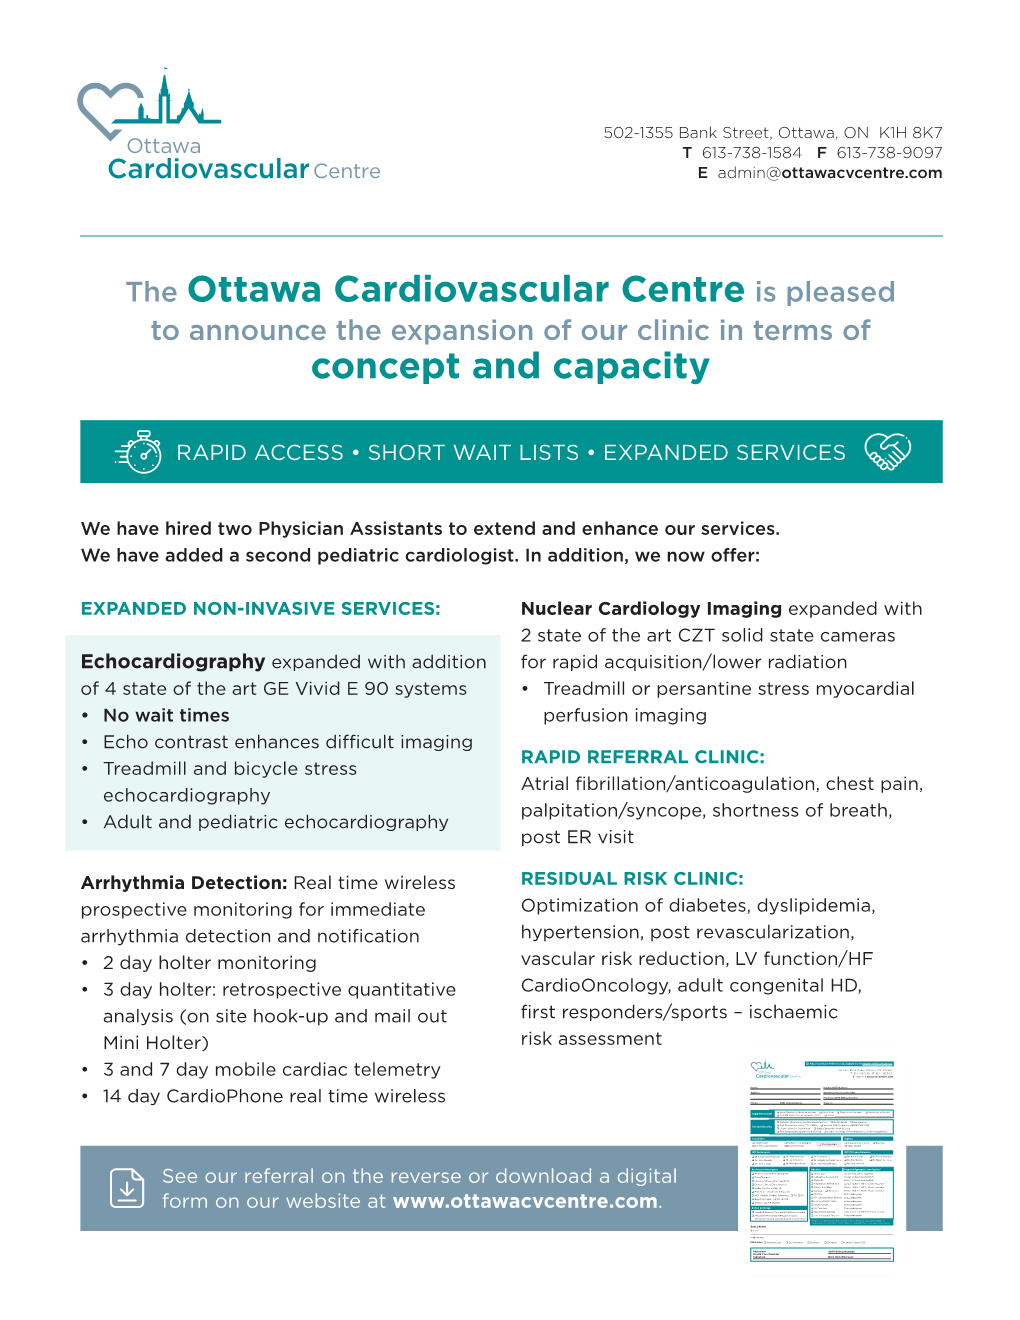 The Ottawa Cardiovascular Centre Is Pleased Concept and Capacity